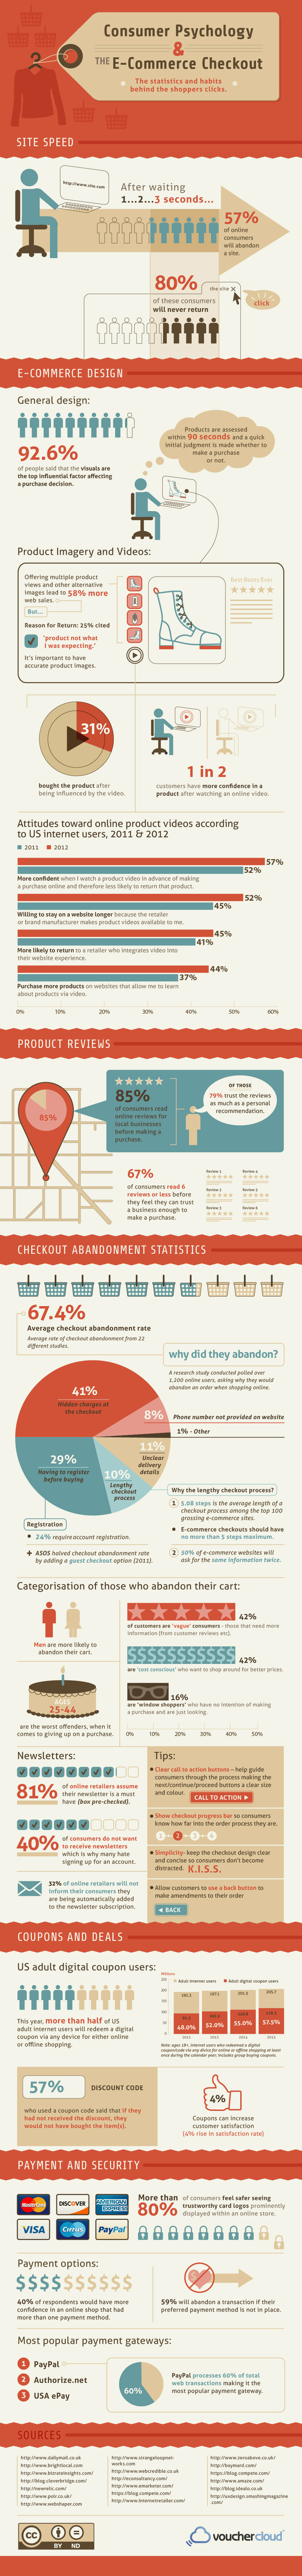 Hypergrid Consumer Psychology and ECommerce Checkouts Infographic